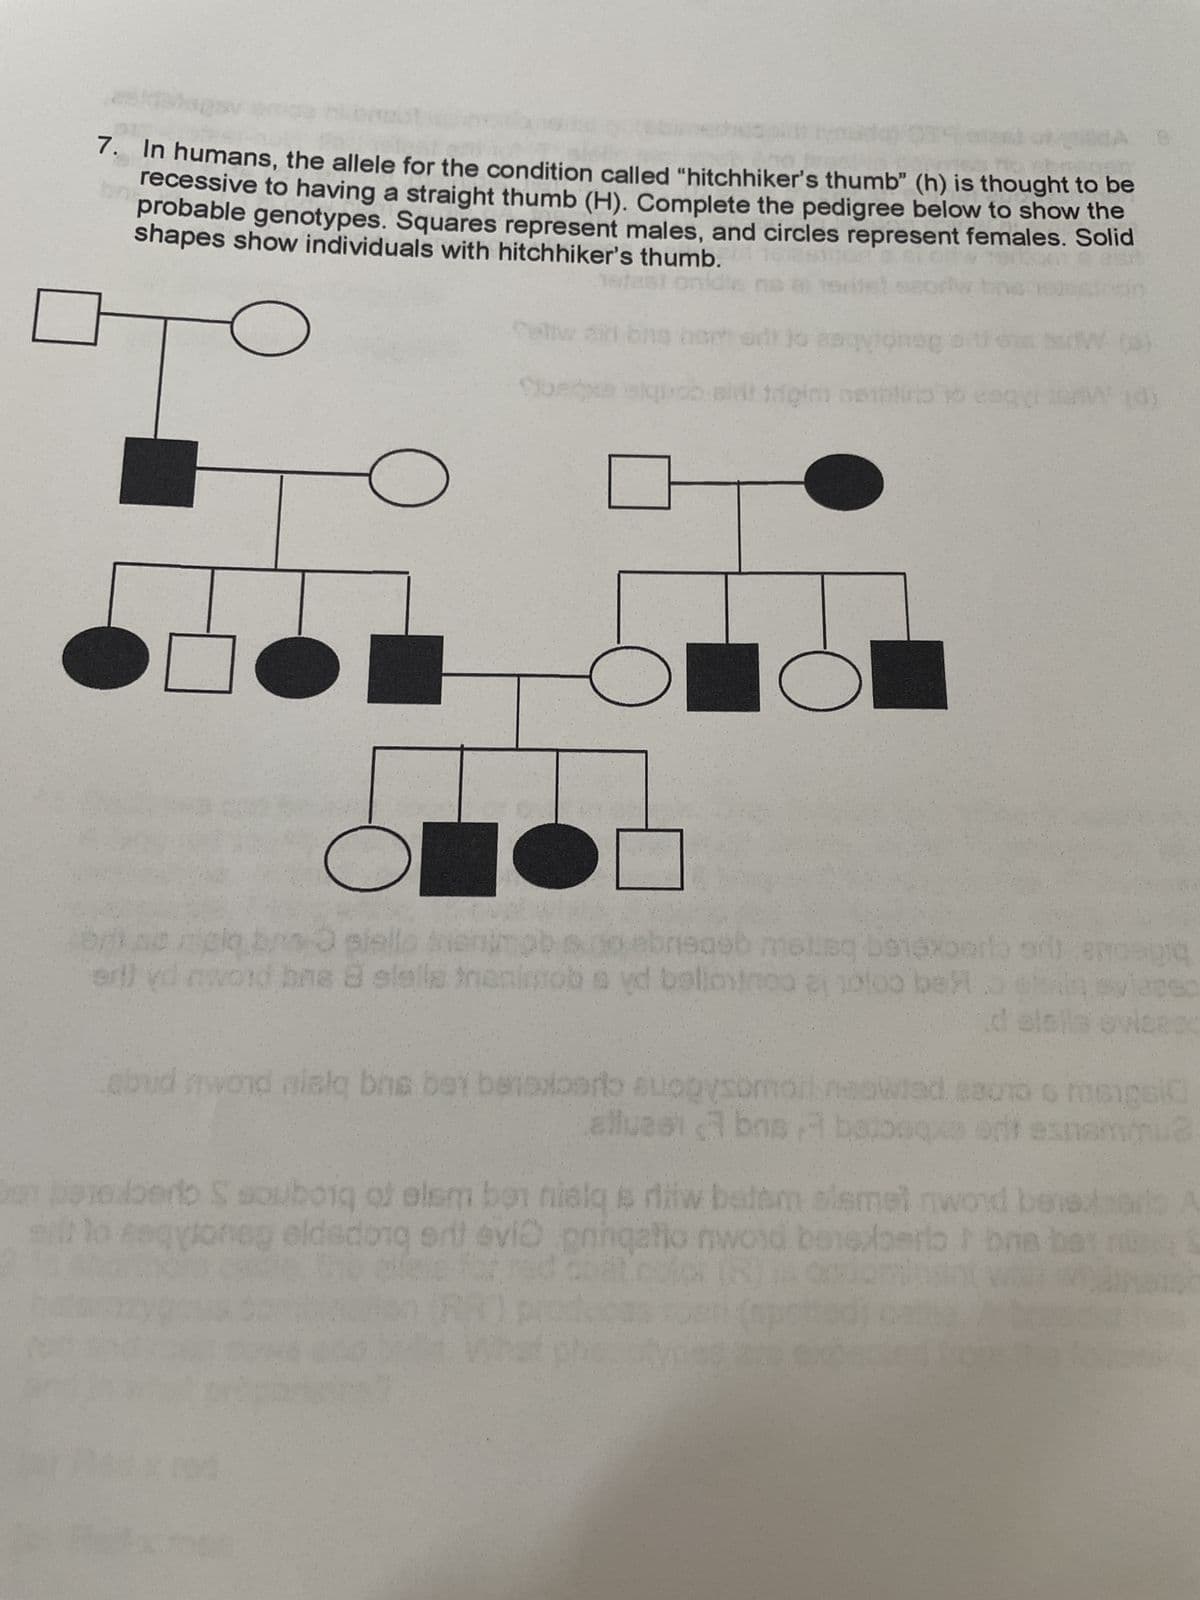 7. In humans, the allele for the condition called "hitchhiker's thumb" (h) is thought to be
recessive to having a straight thumb (H). Complete the pedigree below to show the
probable genotypes. Squares represent males, and circles represent females. Solid
shapes show individuals with hitchhiker's thumb.
Tetest on
O
Telw 21
Obe
Spagx
elift
to asqyloneg
nembling
O
N
be nick brs O siello frienimob do ebrisasb molaq belexperlo ar emosią
yd
erl) vd word bna 8 stella tranimob syd ballostno aj otoo belo otin sylace:
delslls evideod
abud mwond aislą bns ben beoxboro suppysomorneowiad cauro s mengsi
bo
allueen a bnsa belbsque ont esnammu?
en beteaberto S souborg of elem ben nialq s riw batam sismel word bensbero A
t
sill to sequioneg eldsdong srit evi pnhqalio nword benexperlo bria bas ng s
ellene for red.coalcool (